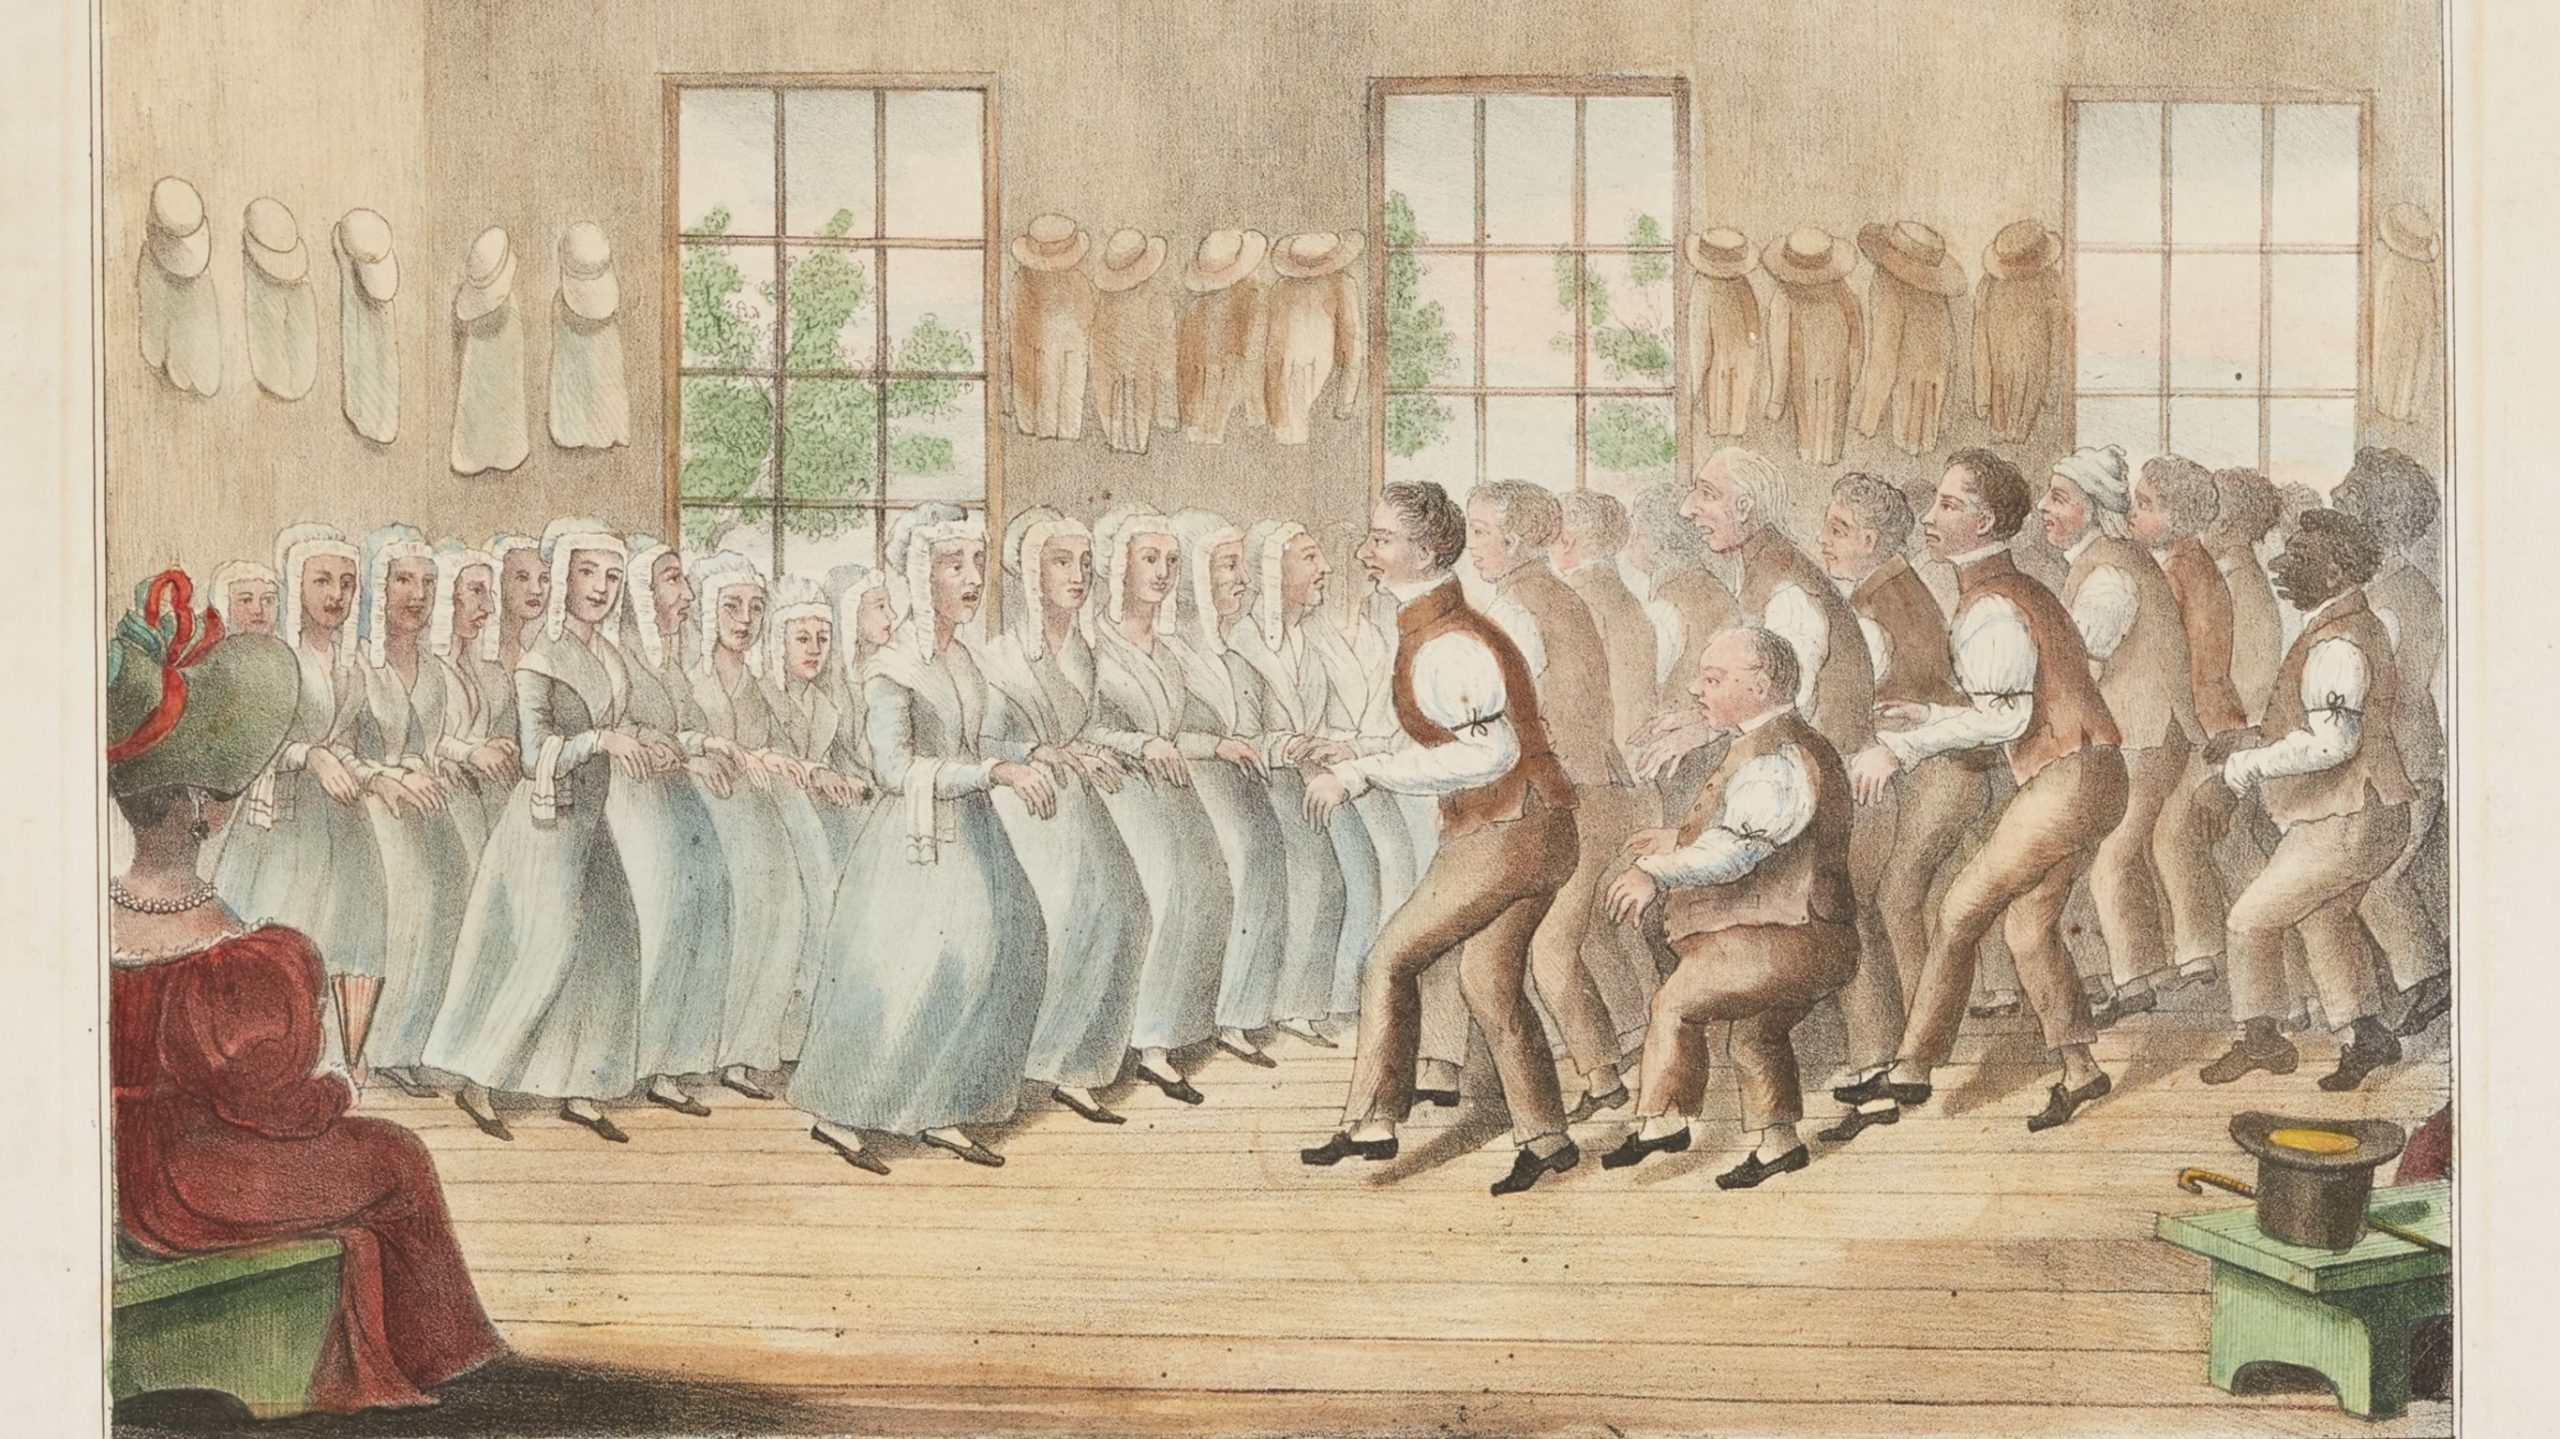 A lithograph of a group of Shakers dancing in a room.